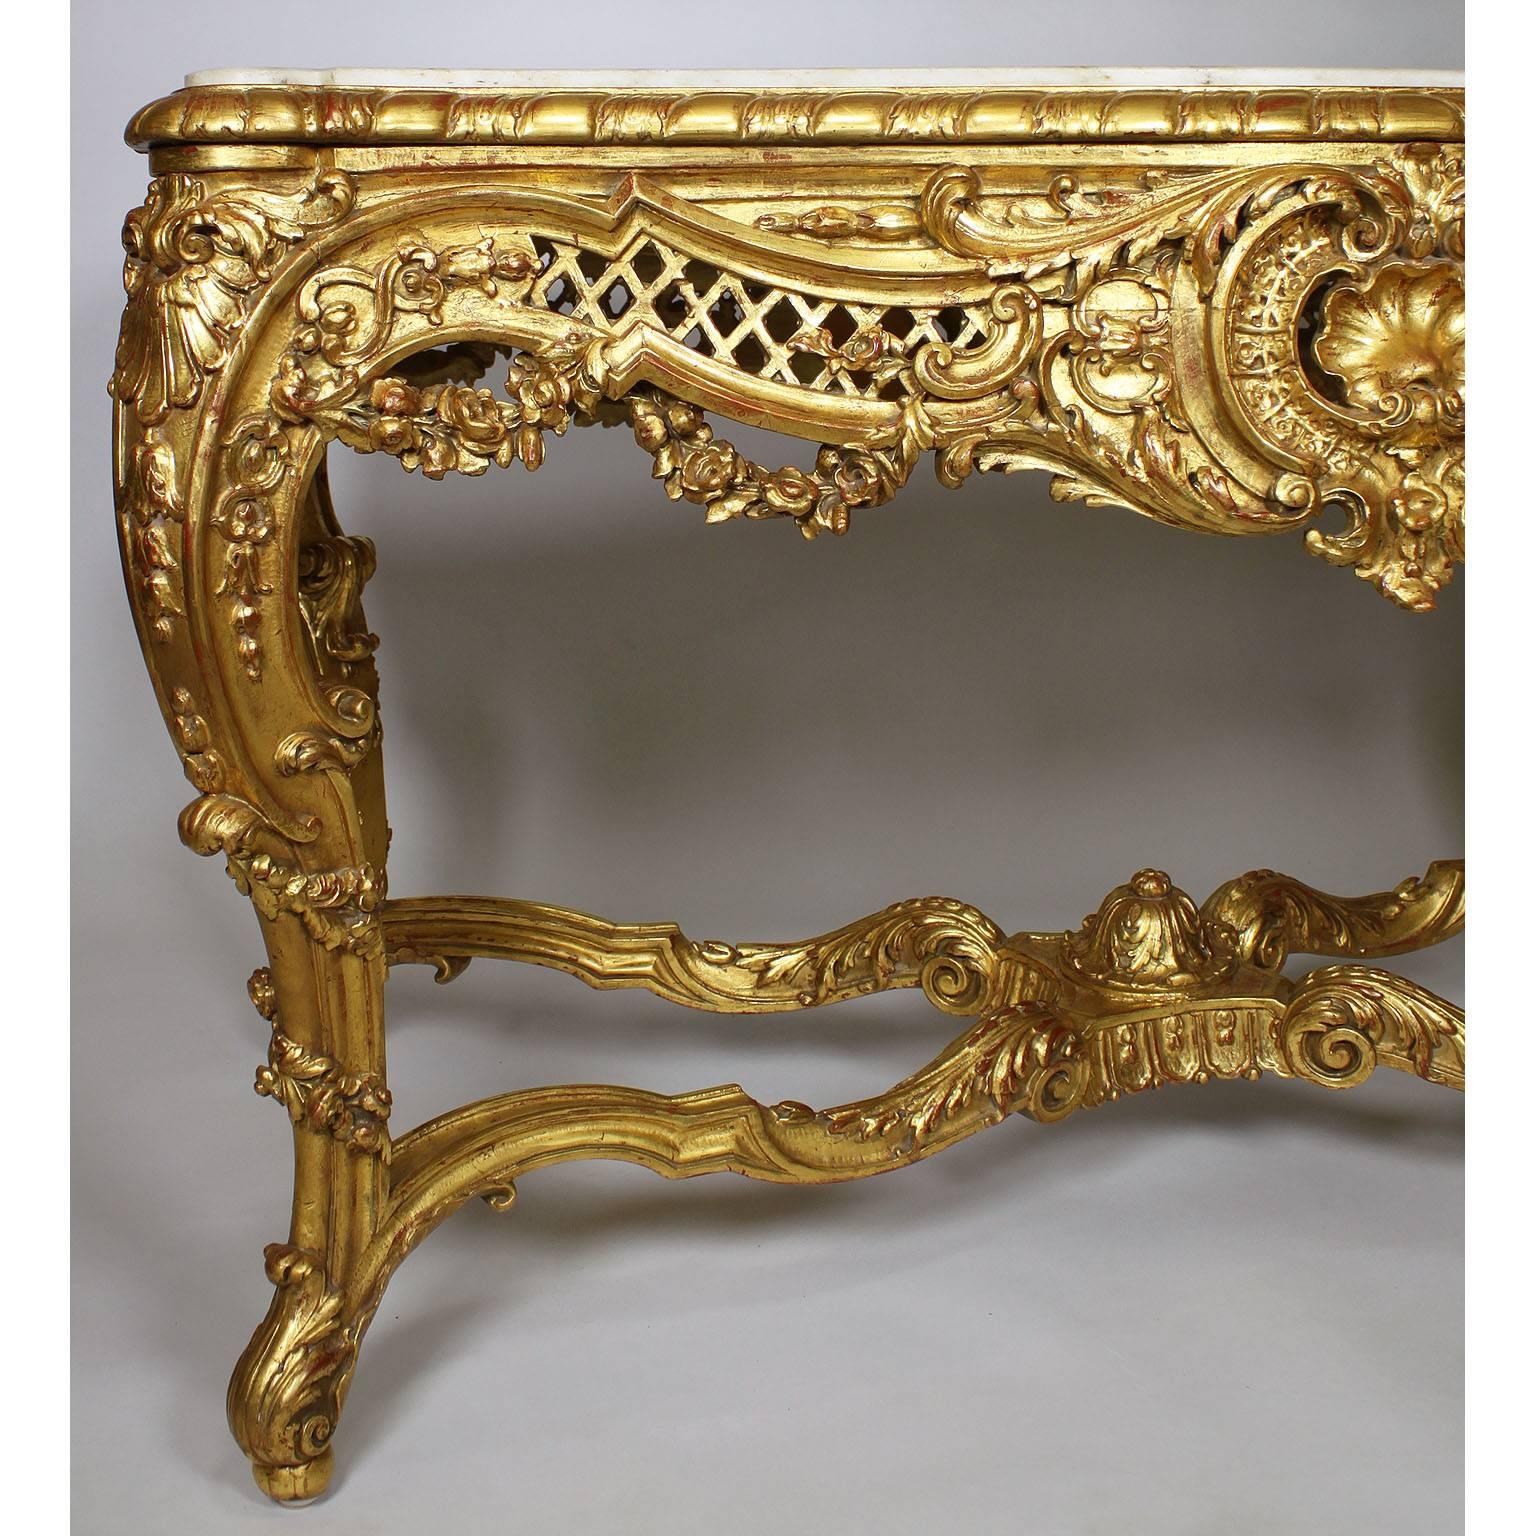 Early 20th Century French Belle Époque 19th-20th Century Giltwood Carved Rococo Center Hall Table For Sale